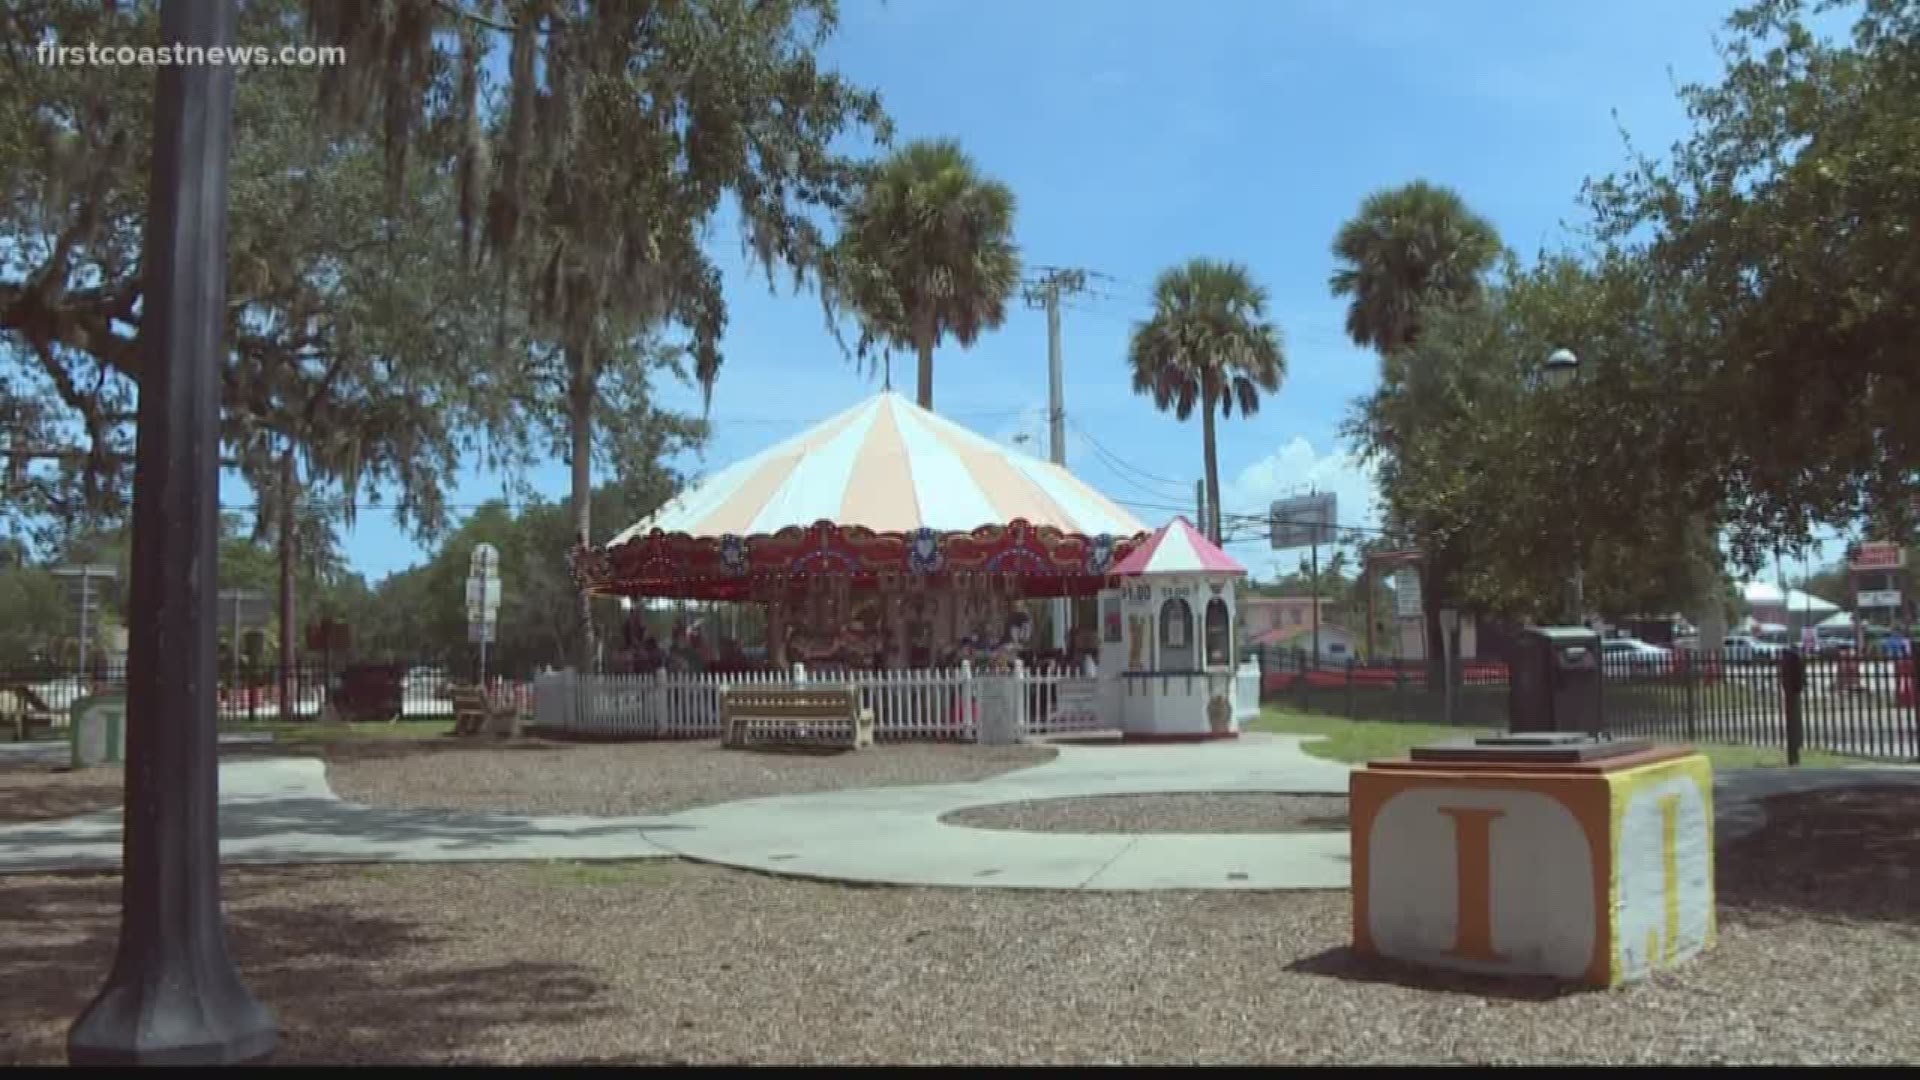 The operator of St. Augustine’s iconic carousel has died, and his widow plans to dismantle the landmark, City Manager John Regan said.